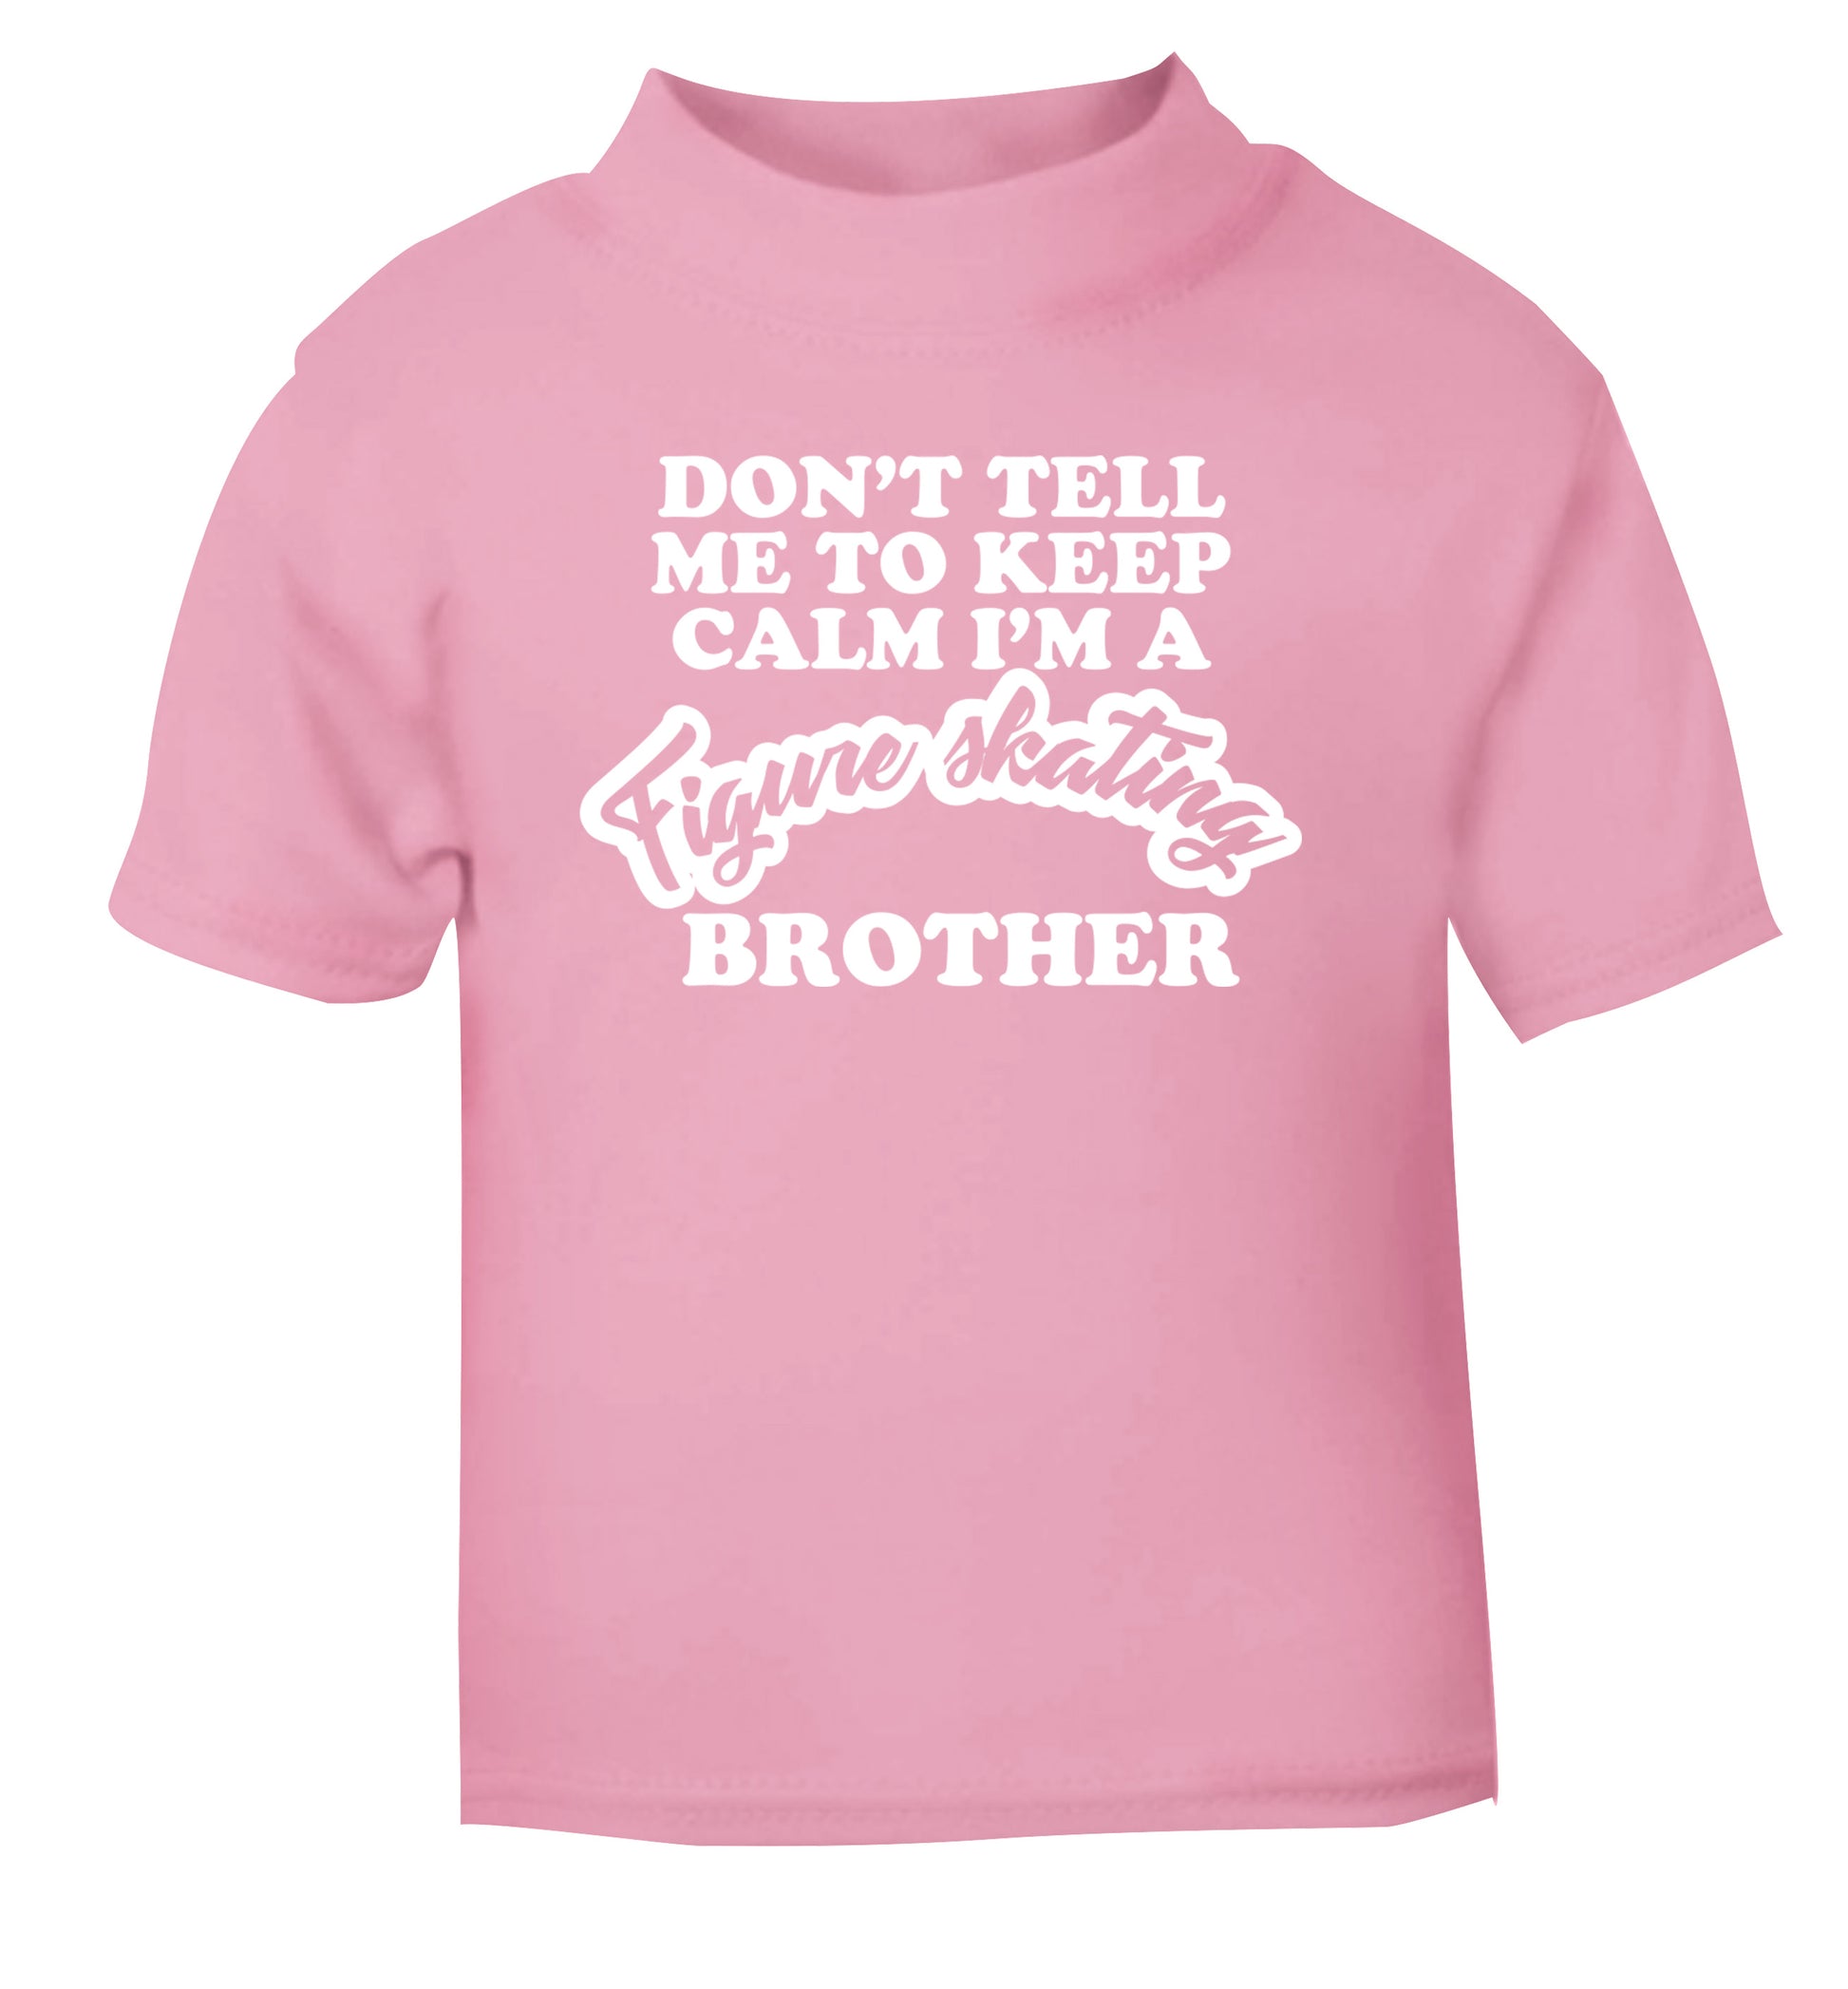 Don't tell me to keep calm I'm a figure skating brother light pink Baby Toddler Tshirt 2 Years